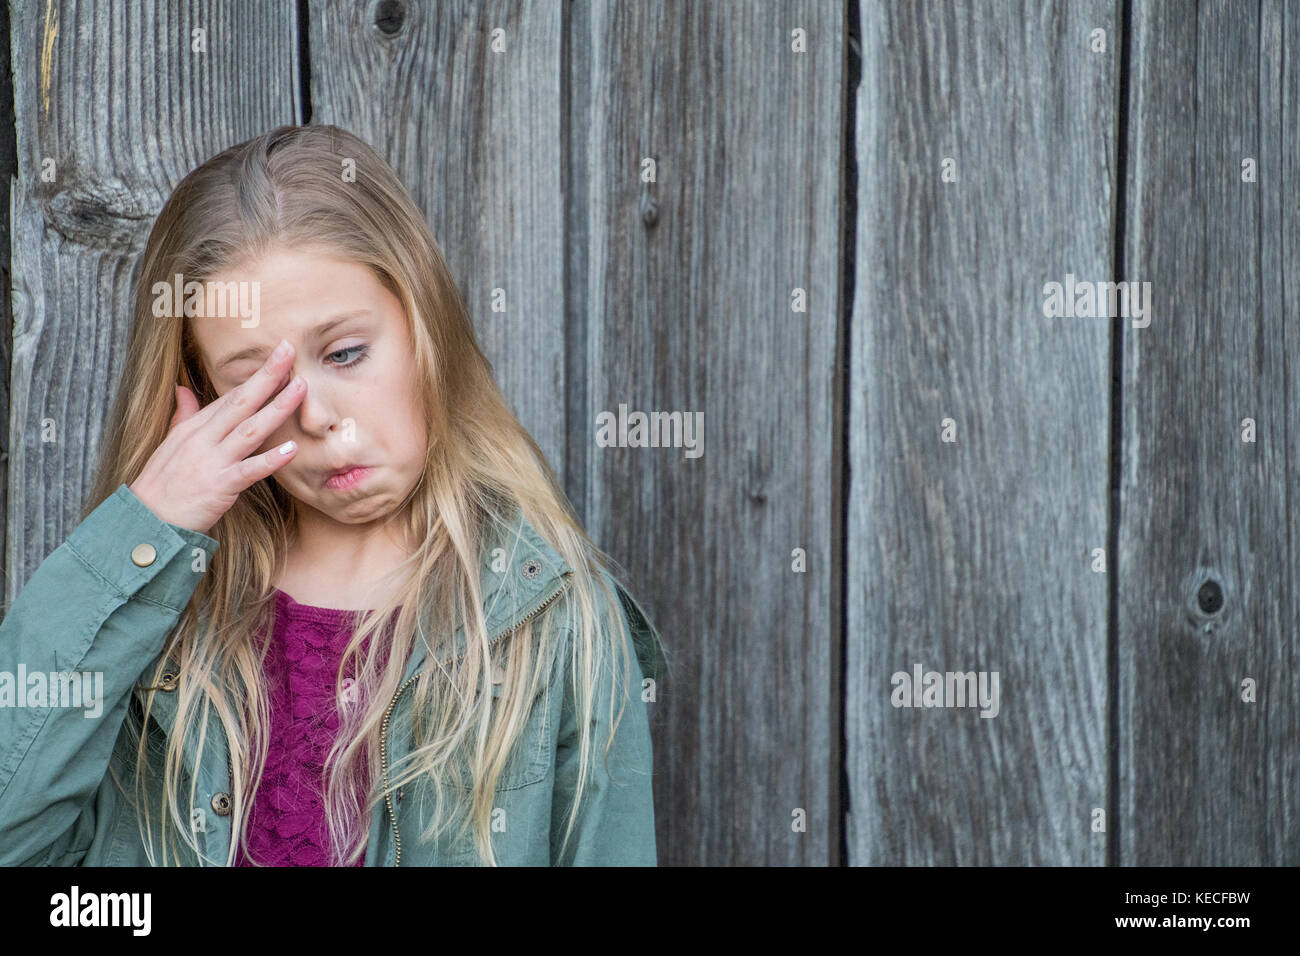 young blond Caucasian girl rubbing eye with rustic wood background Stock Photo